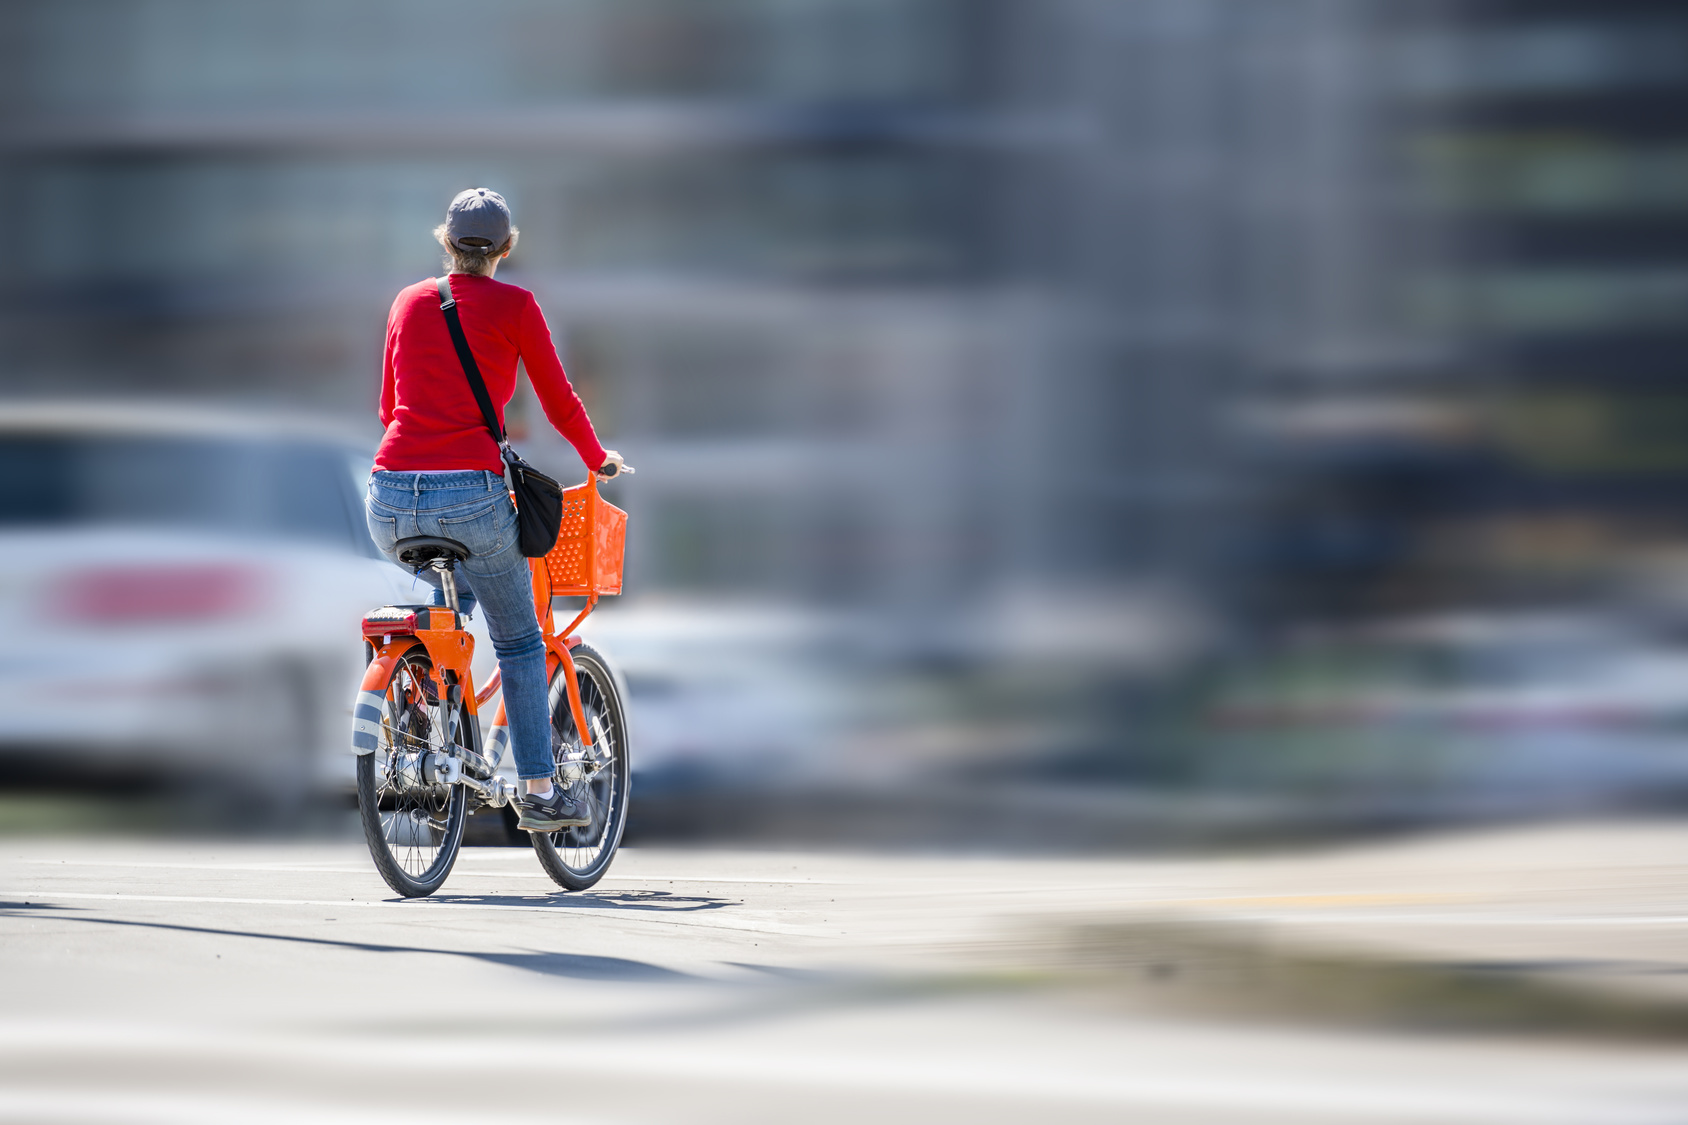 Woman on an orange bike with basket rides on bike path on the road next to other vehicles